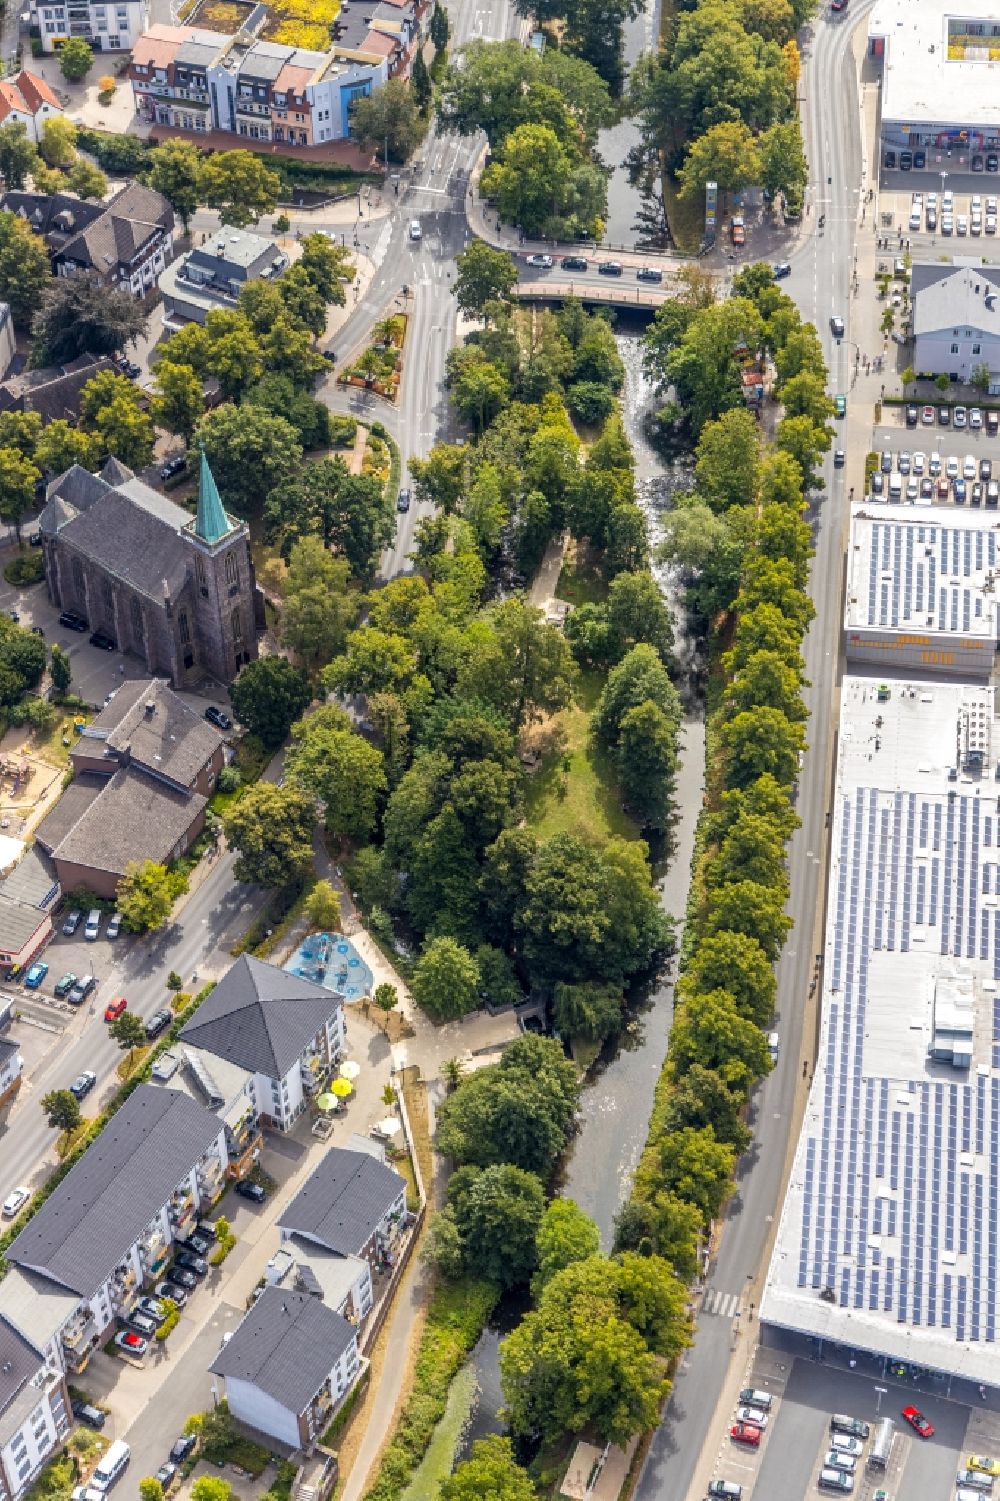 Aerial image Menden (Sauerland) - Church building of the Heilig-Geist-Kirche at the industrial area along the course of the river Henne on the streets Untere Promenade and Bodelschwinghstrasse in Menden (Sauerland) in the state North Rhine-Westphalia, Germany